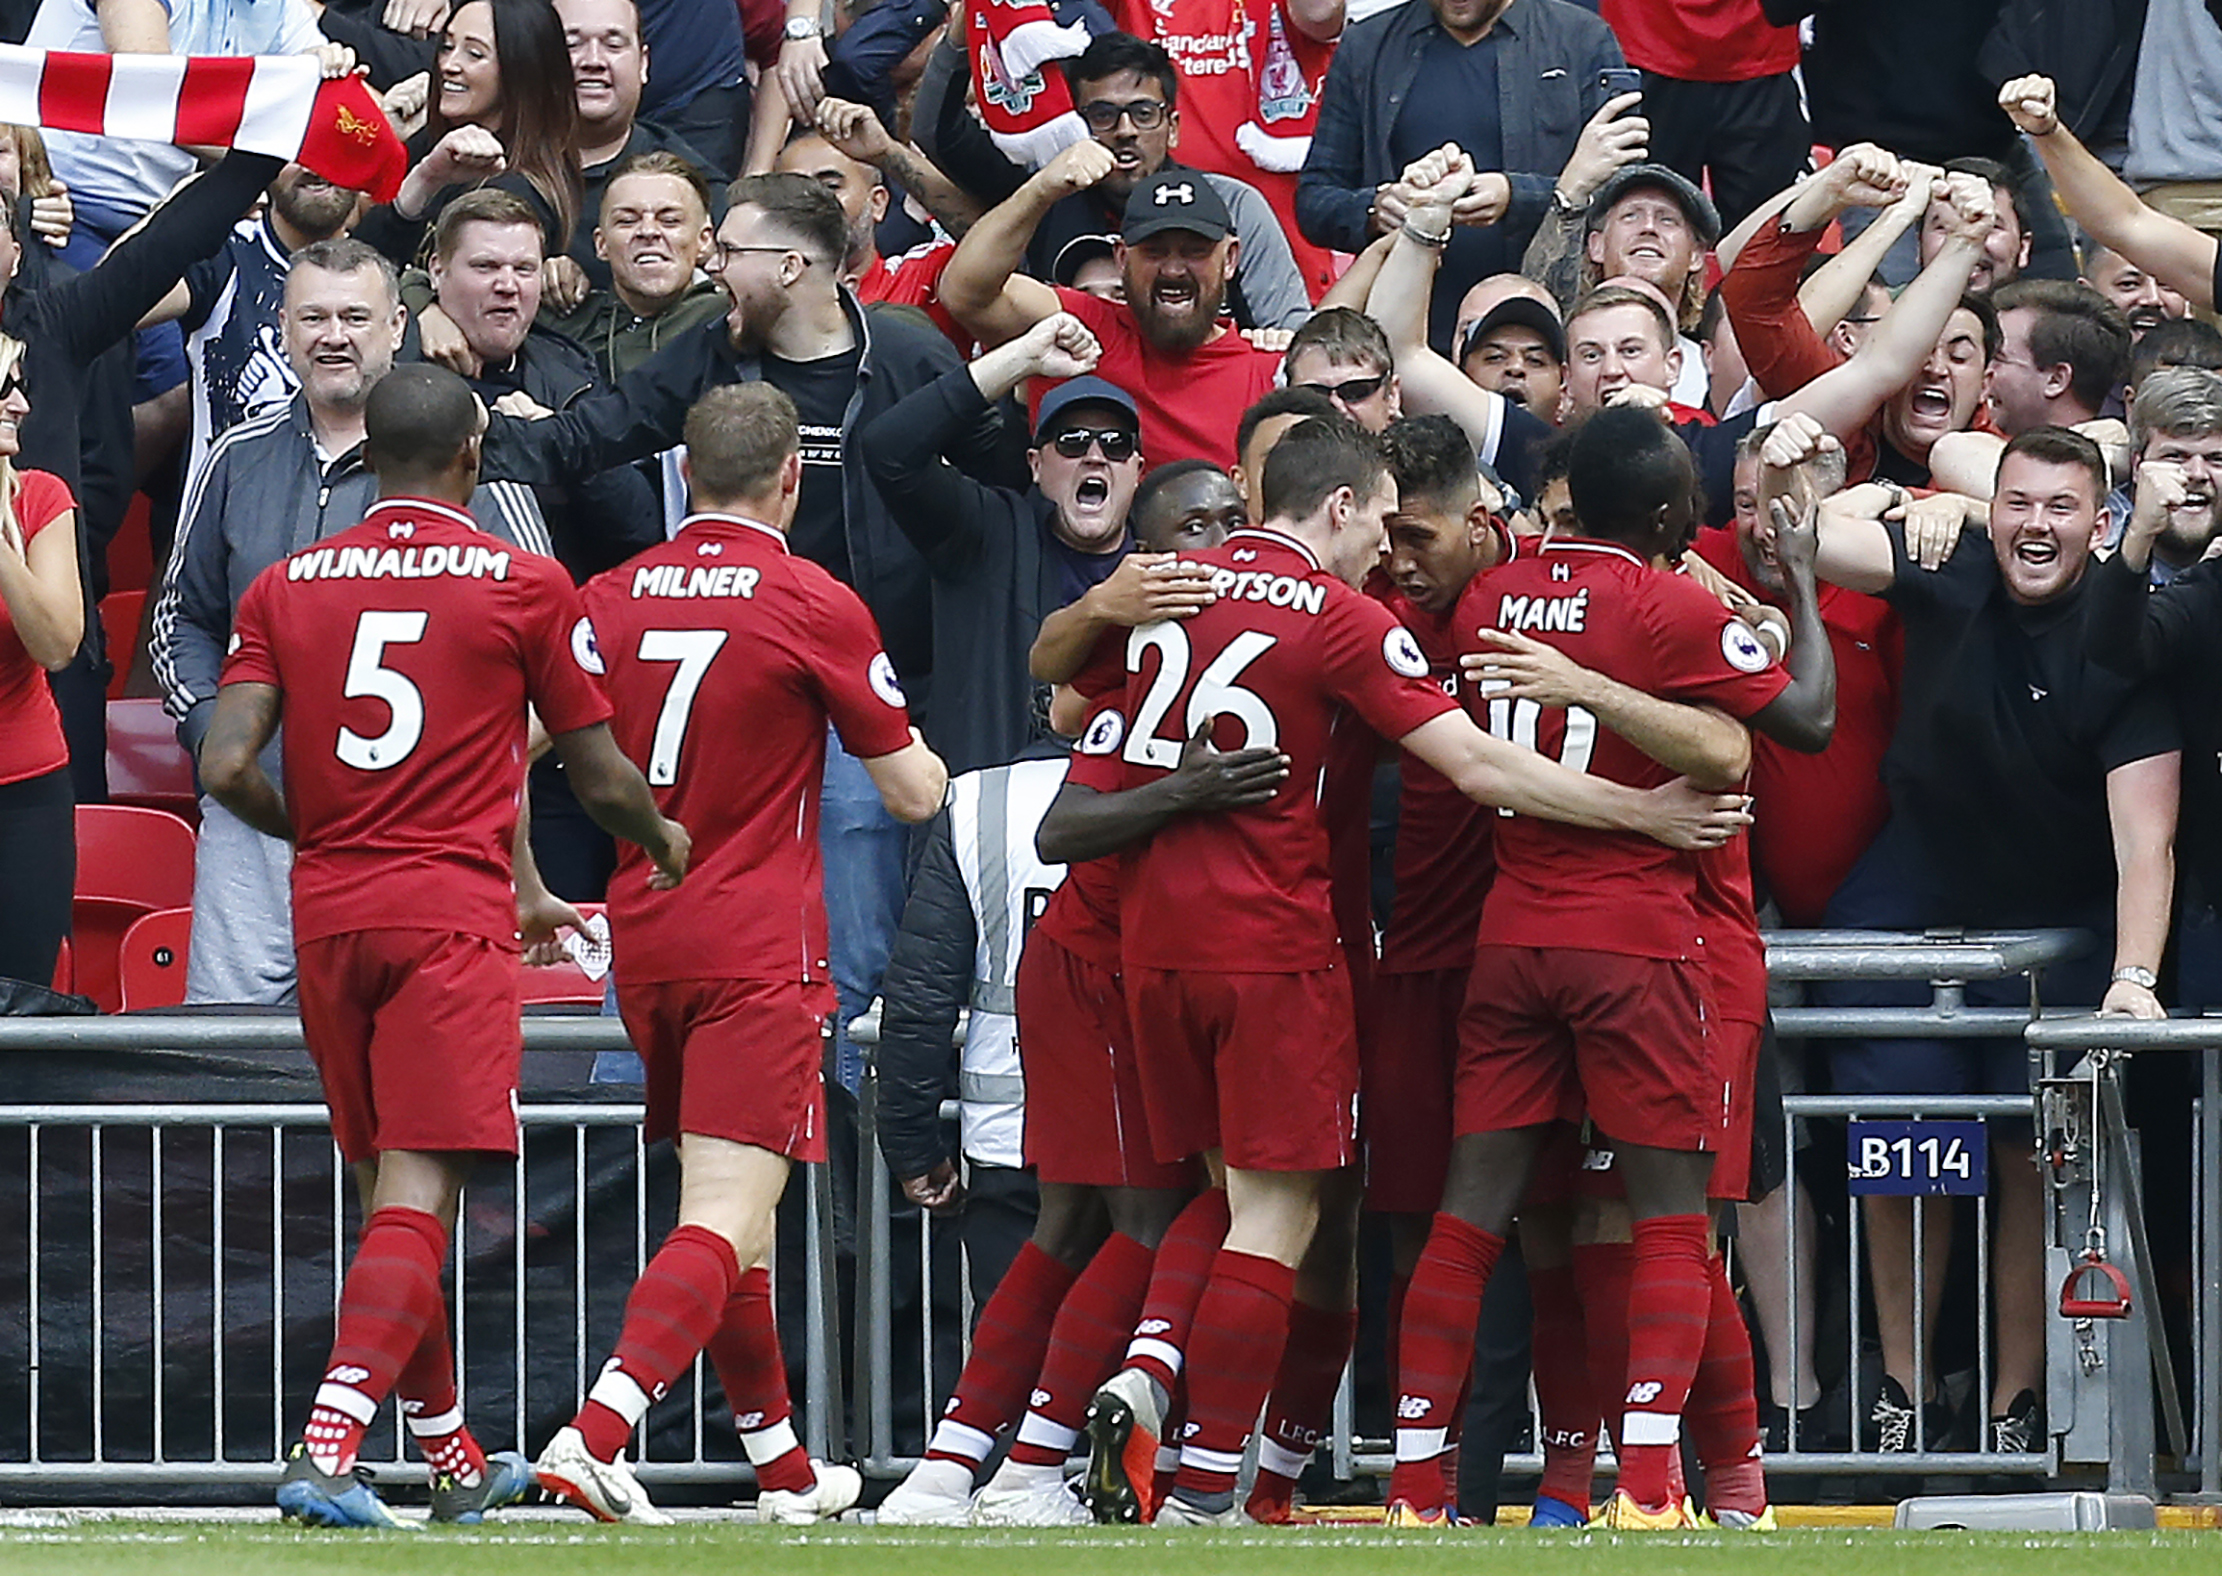 Liverpool's Brazilian midfielder Roberto Firmino celebrates with teammates after scoring their second goal during the English Premier League football match between Tottenham Hotspur and Liverpool at Wembley Stadium in London, on September 15, 2018. (Photo by Ian KINGTON / IKIMAGES / AFP) / RESTRICTED TO EDITORIAL USE. No use with unauthorized audio, video, data, fixture lists, club/league logos or 'live' services. Online in-match use limited to 45 images, no video emulation. No use in betting, games or single club/league/player publications.        (Photo credit should read IAN KINGTON/AFP/Getty Images)